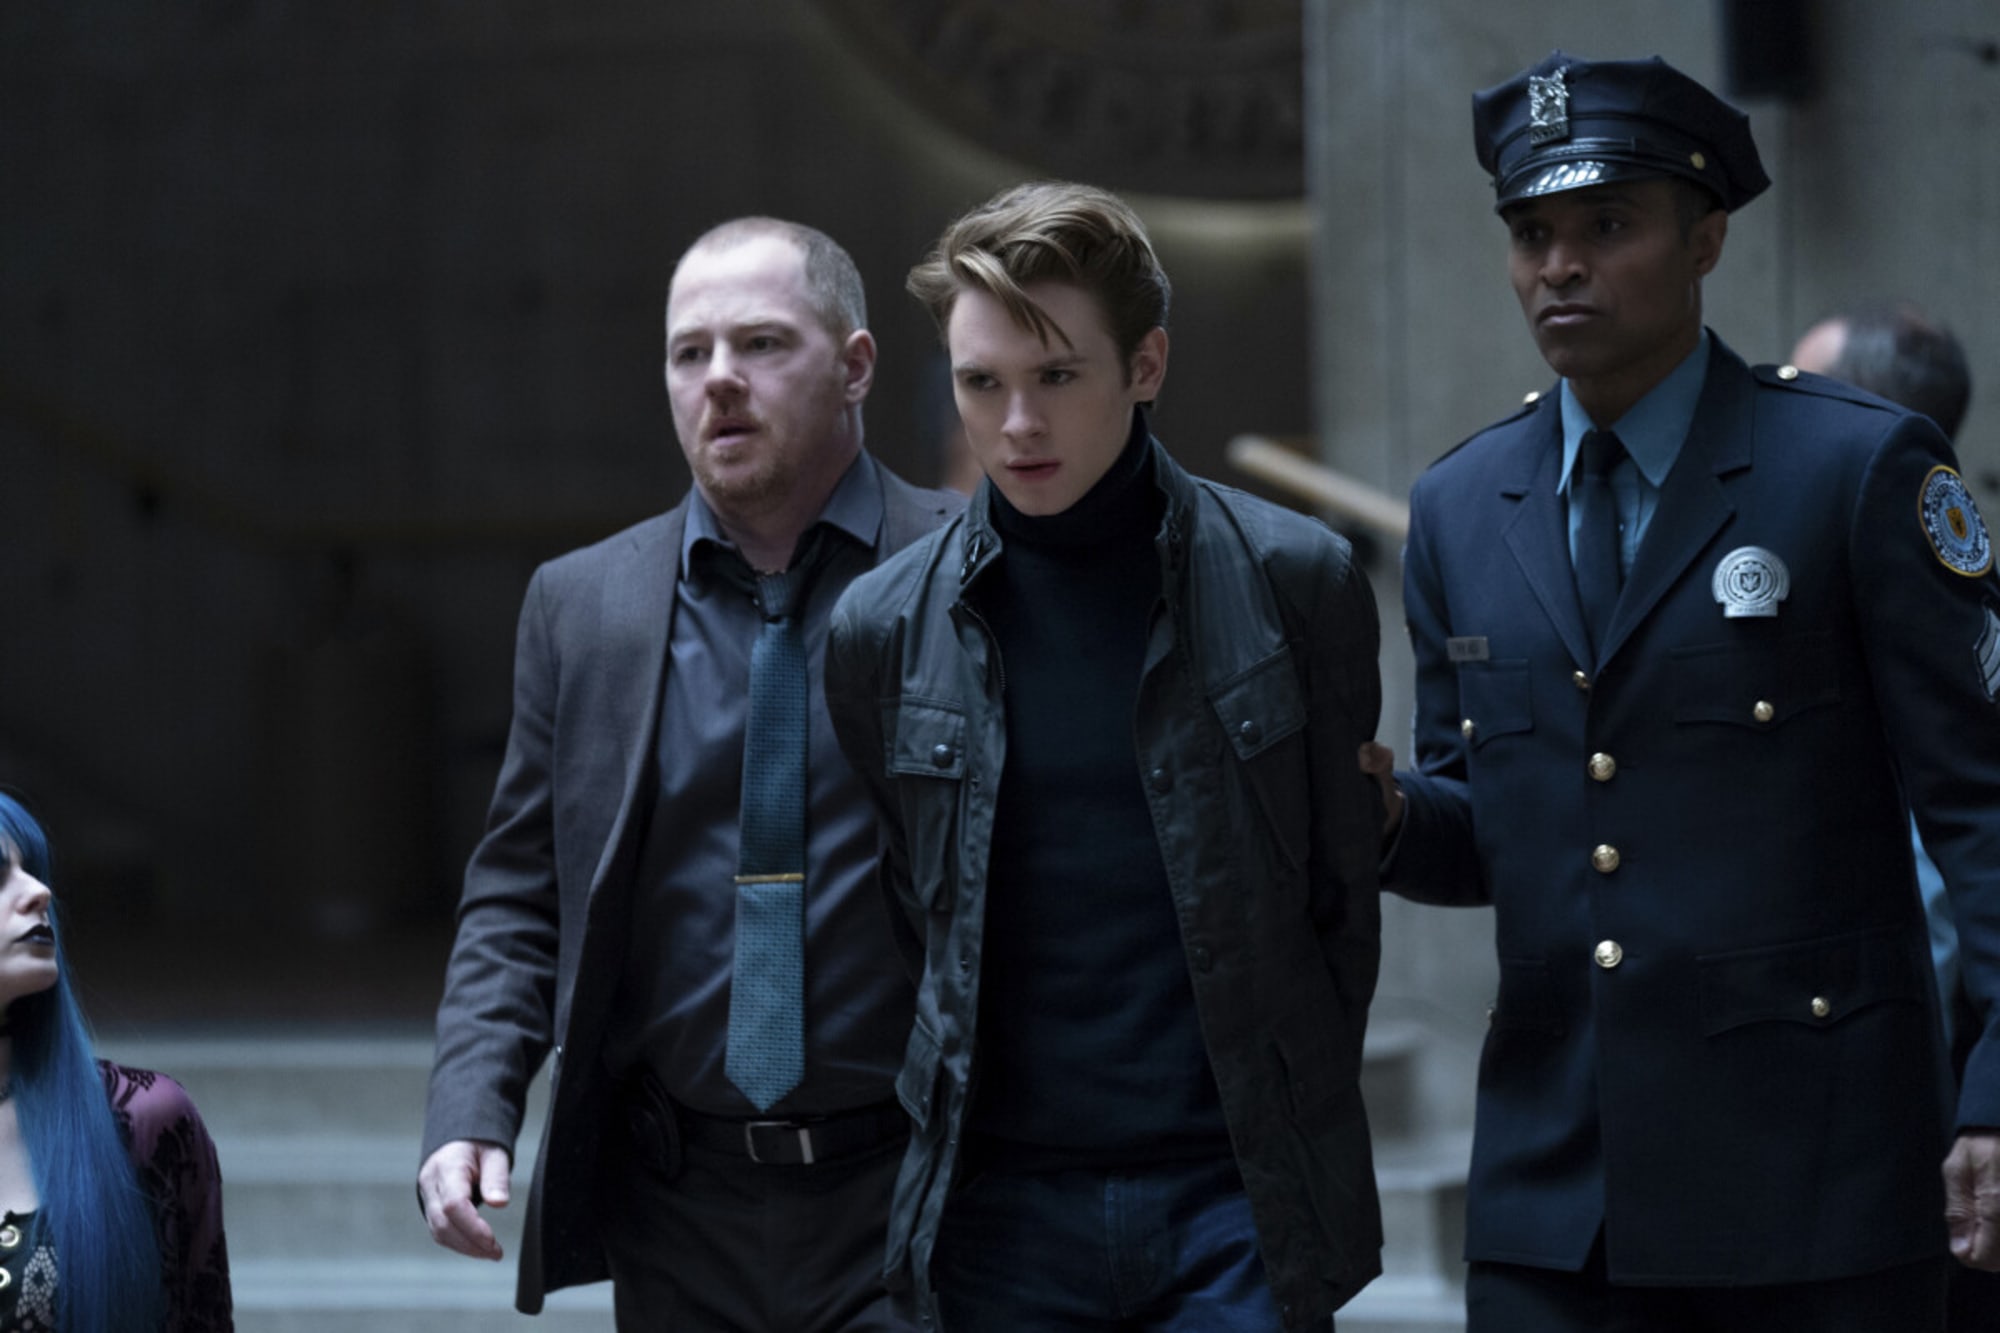 Gotham Knights Season 1 Episode 5 Recap and Review : r